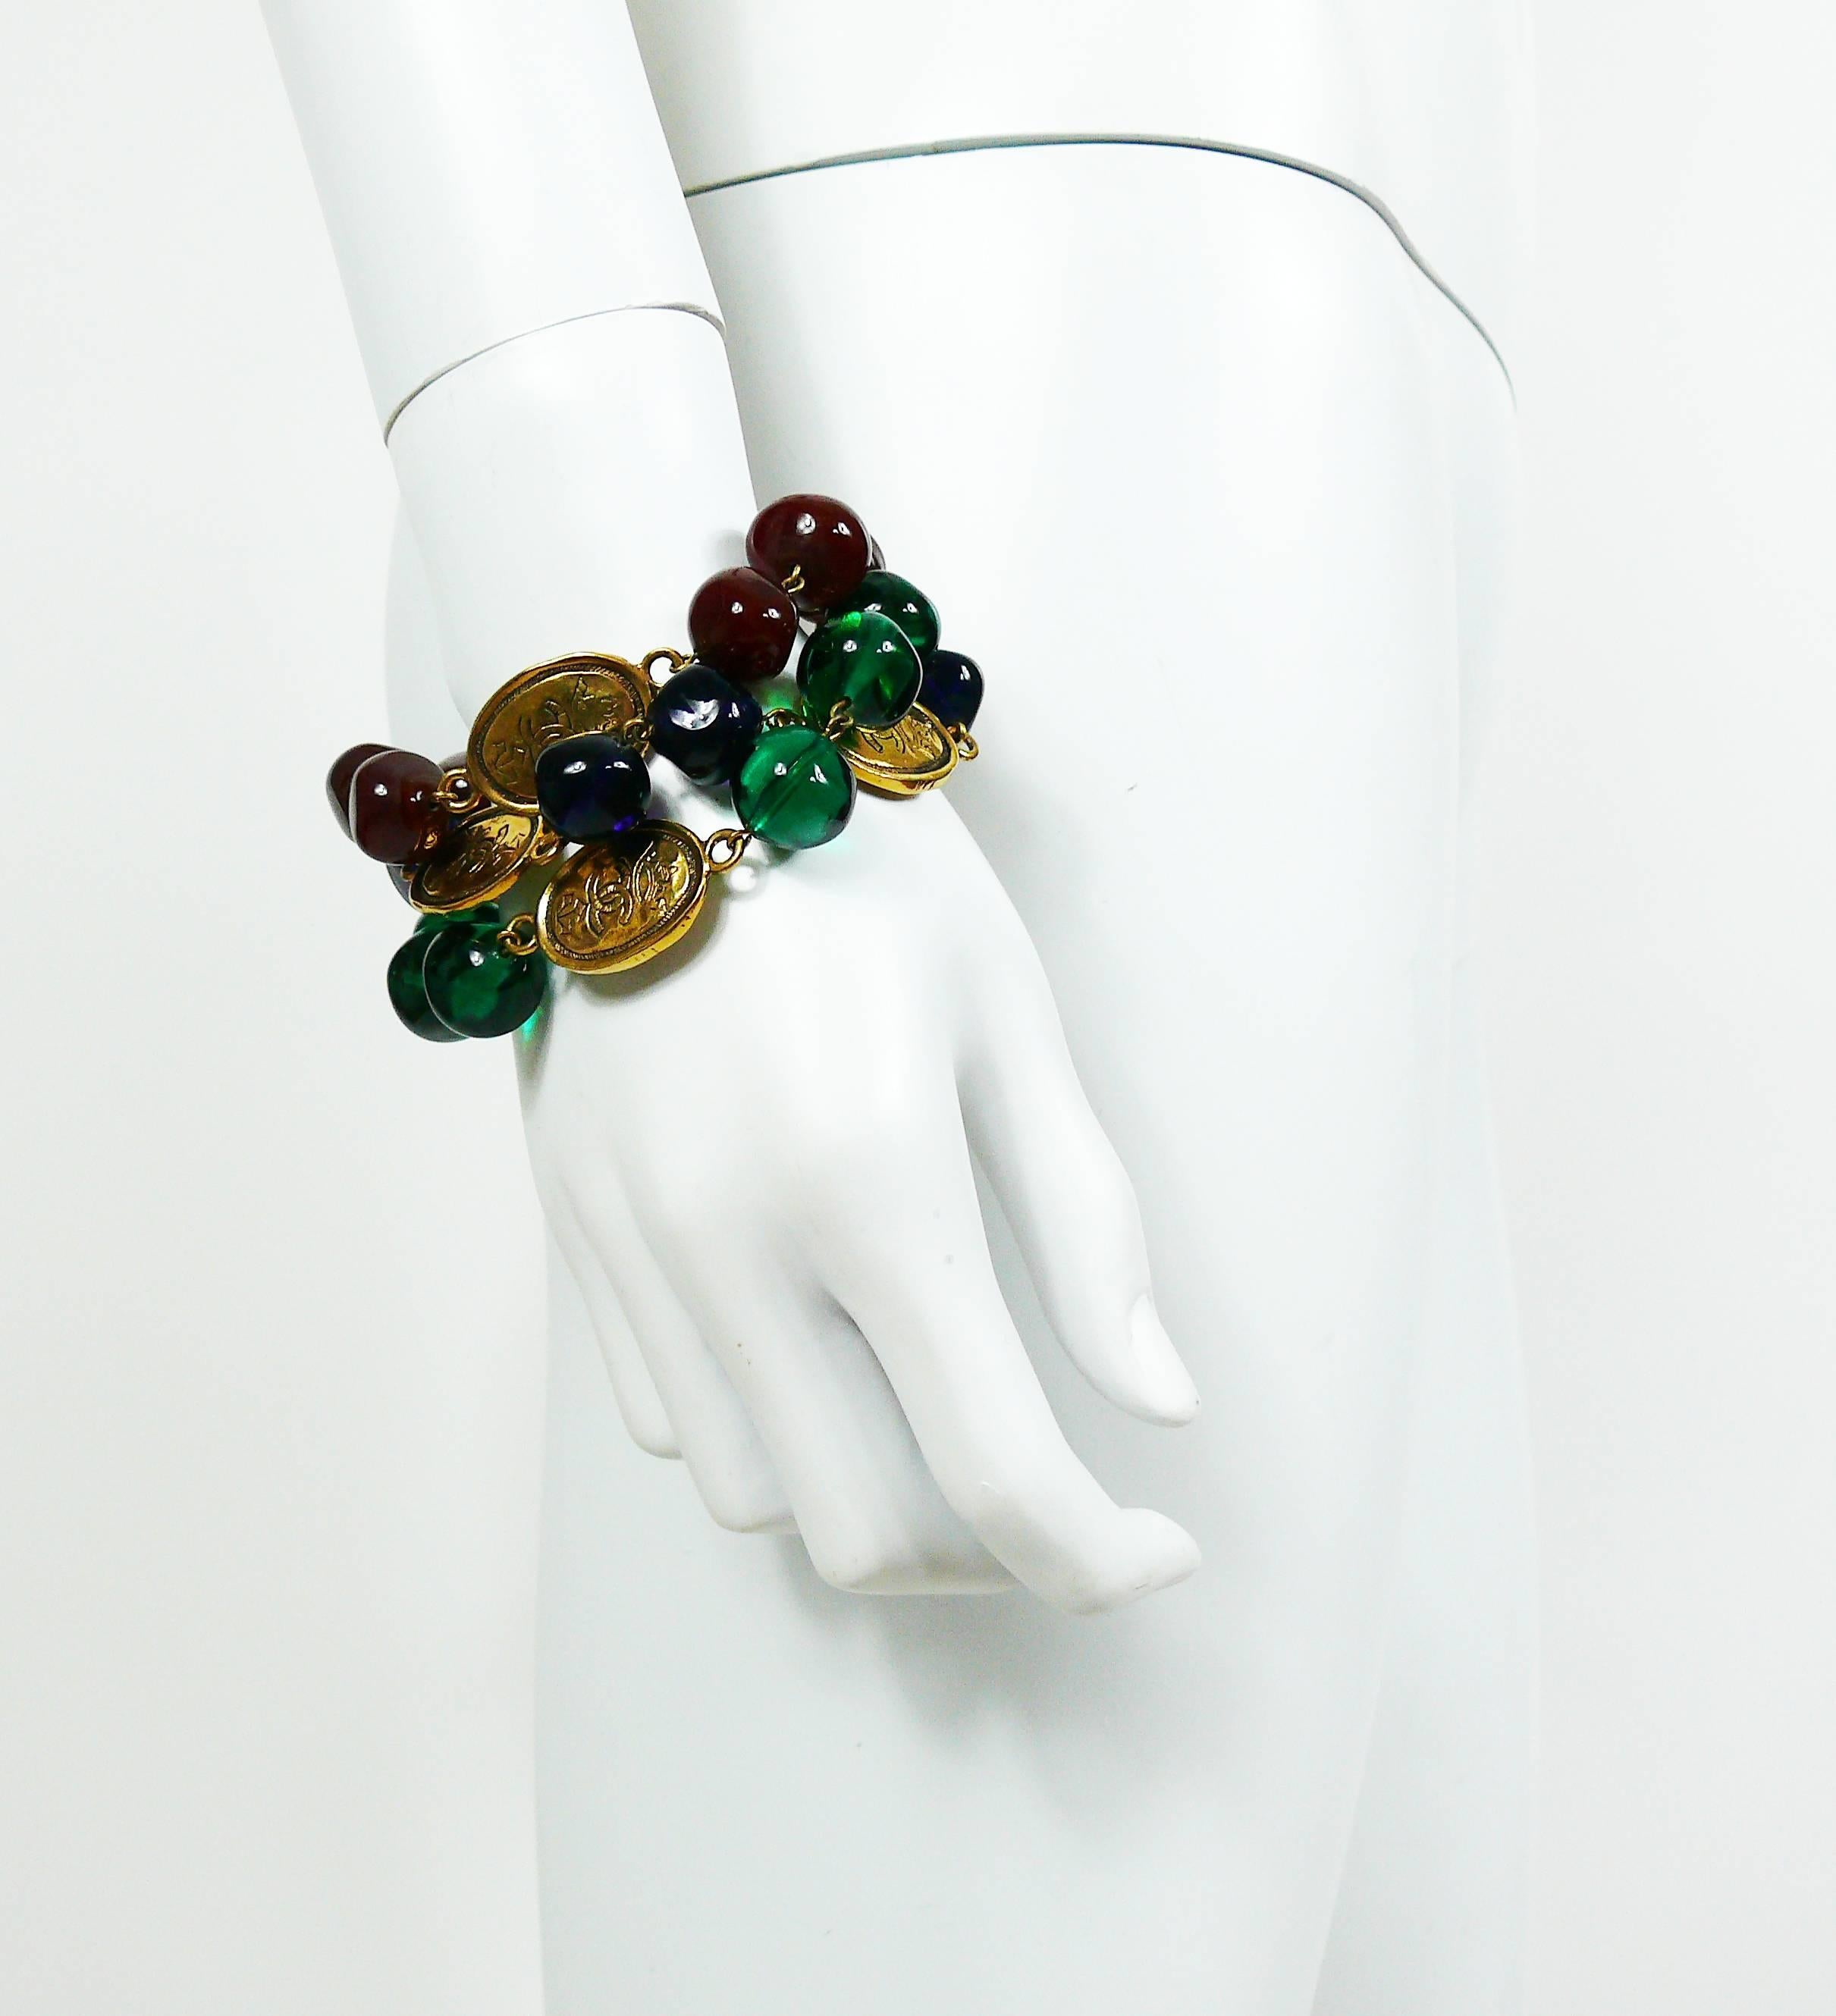 CHANEL vintage triple strand bracelet featuring blue-red-green GRIPOIX glass beads and gold toned crowned CC coins.

Collection year : 1991.

Spring clasp closure.
Extension chain.

Marked CHANEL 2 6 Made in France.

Indicative measurements : length